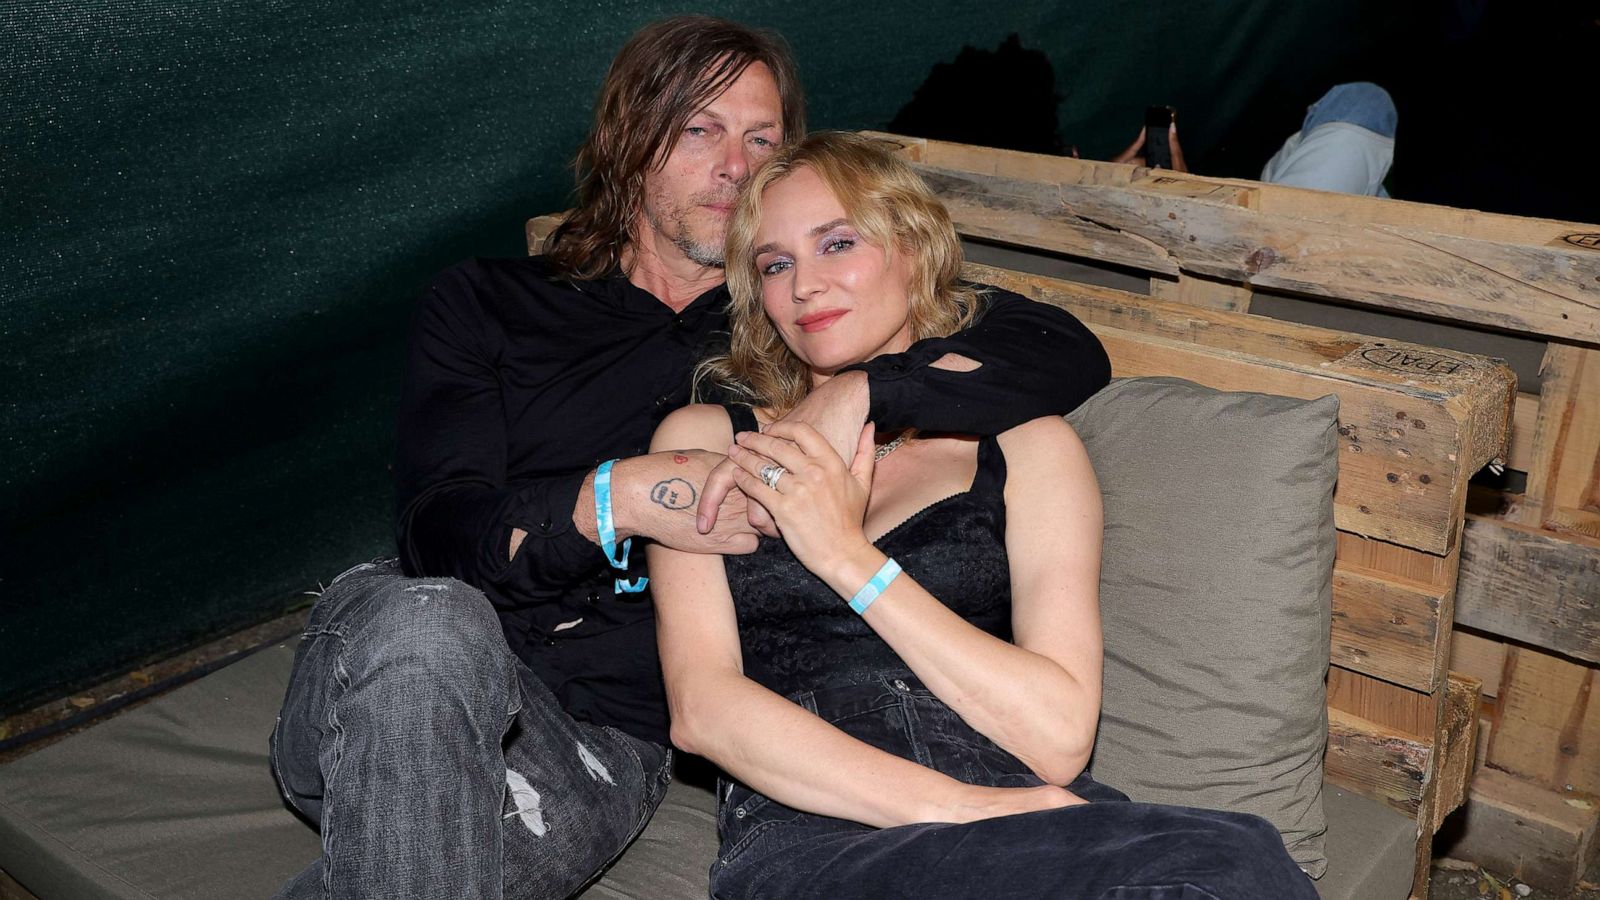 Diane Kruger shares sweet selfie with Norman Reedus to mark 7 years  together - ABC News